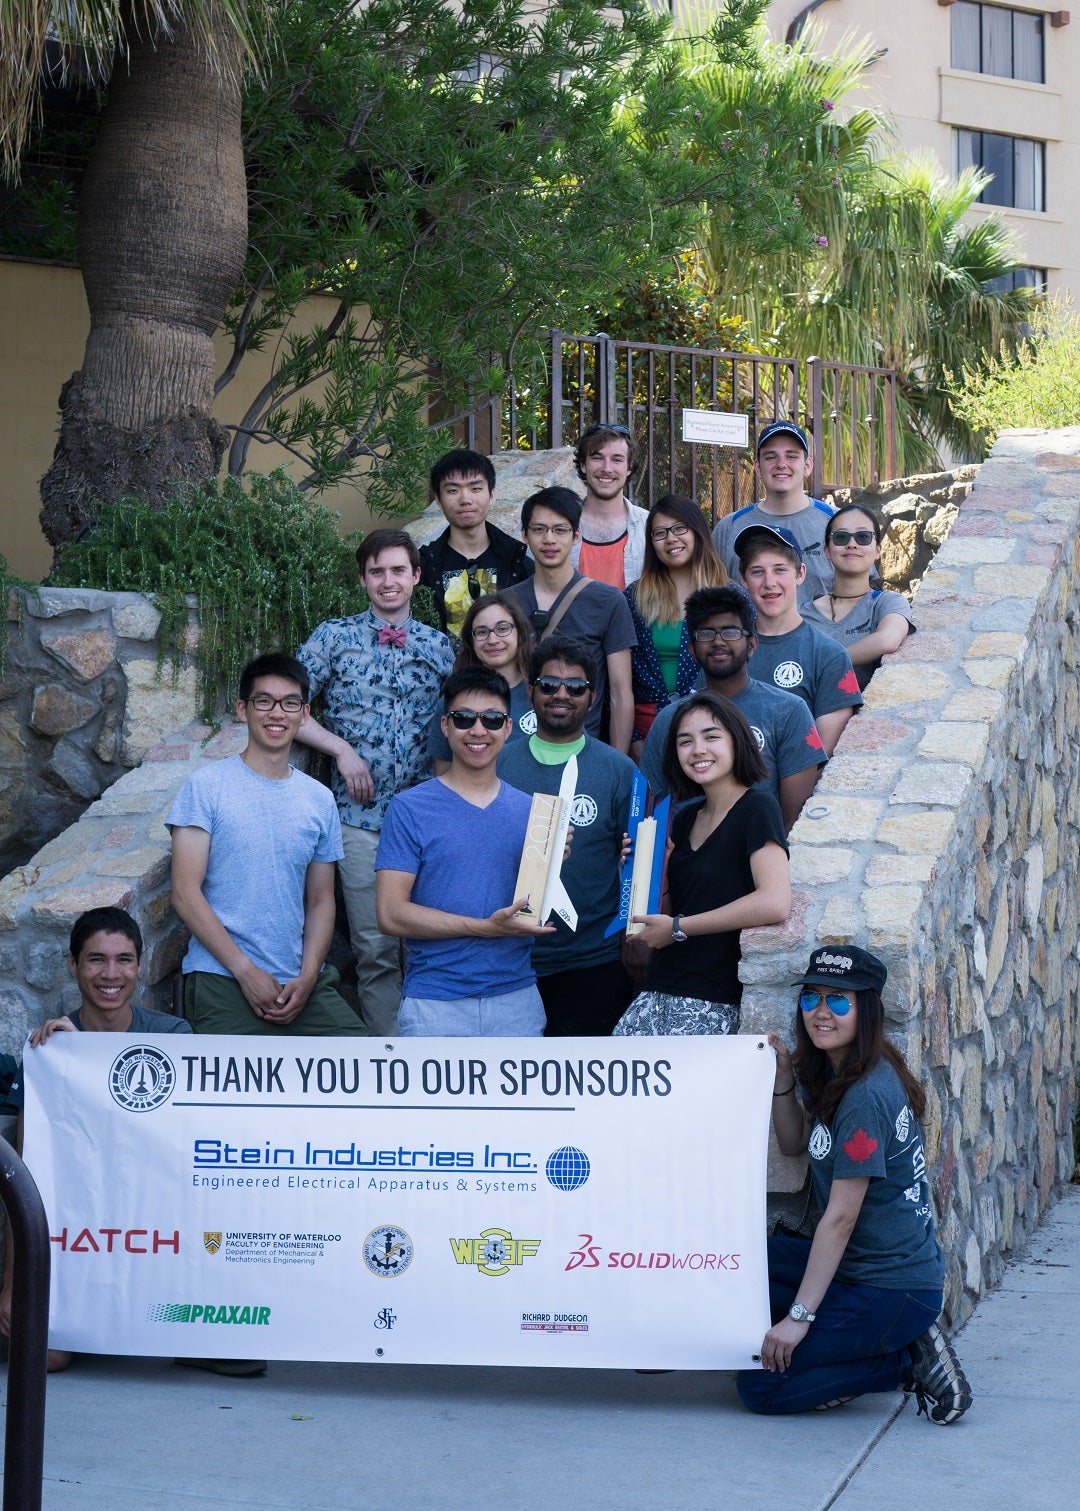 a photo of the Rocketry team holding a big thank you to their sponsers